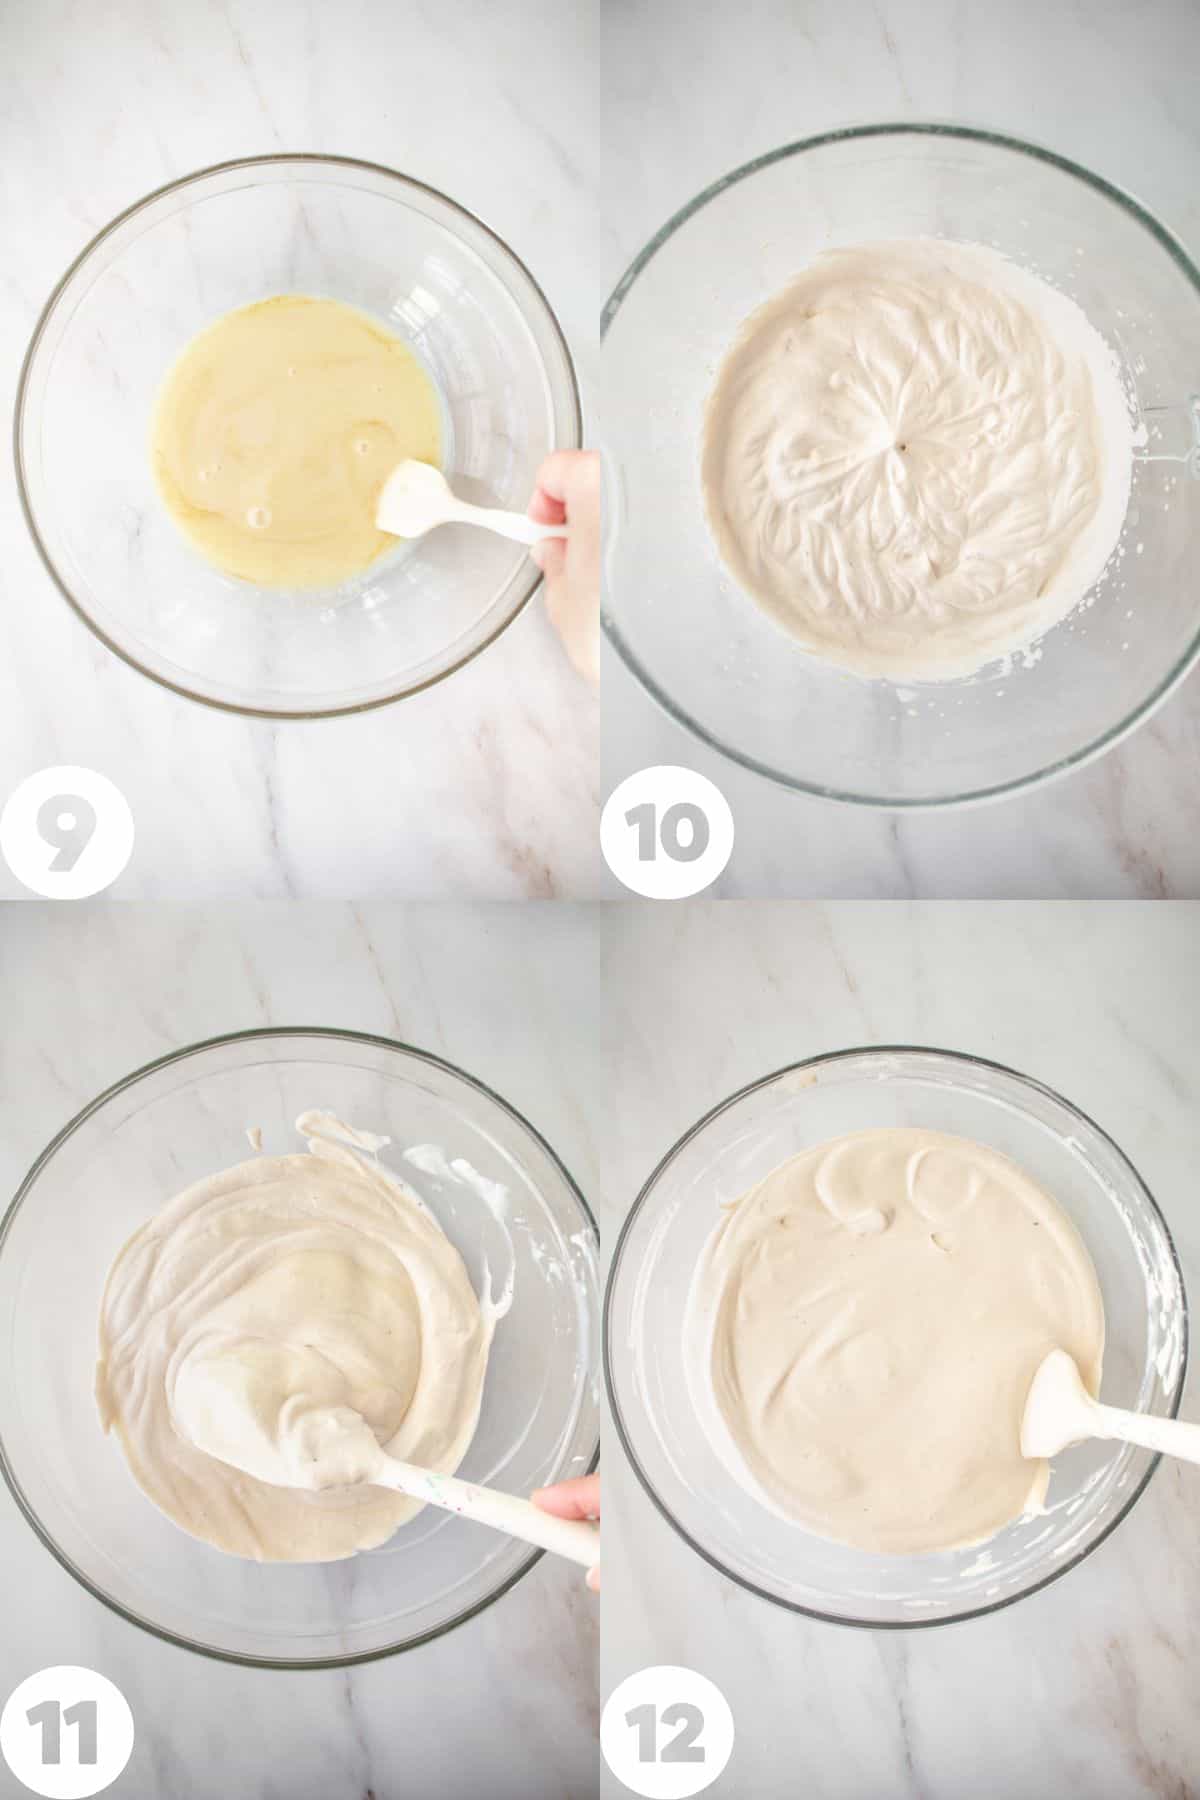 step by step photos of making the ice cream